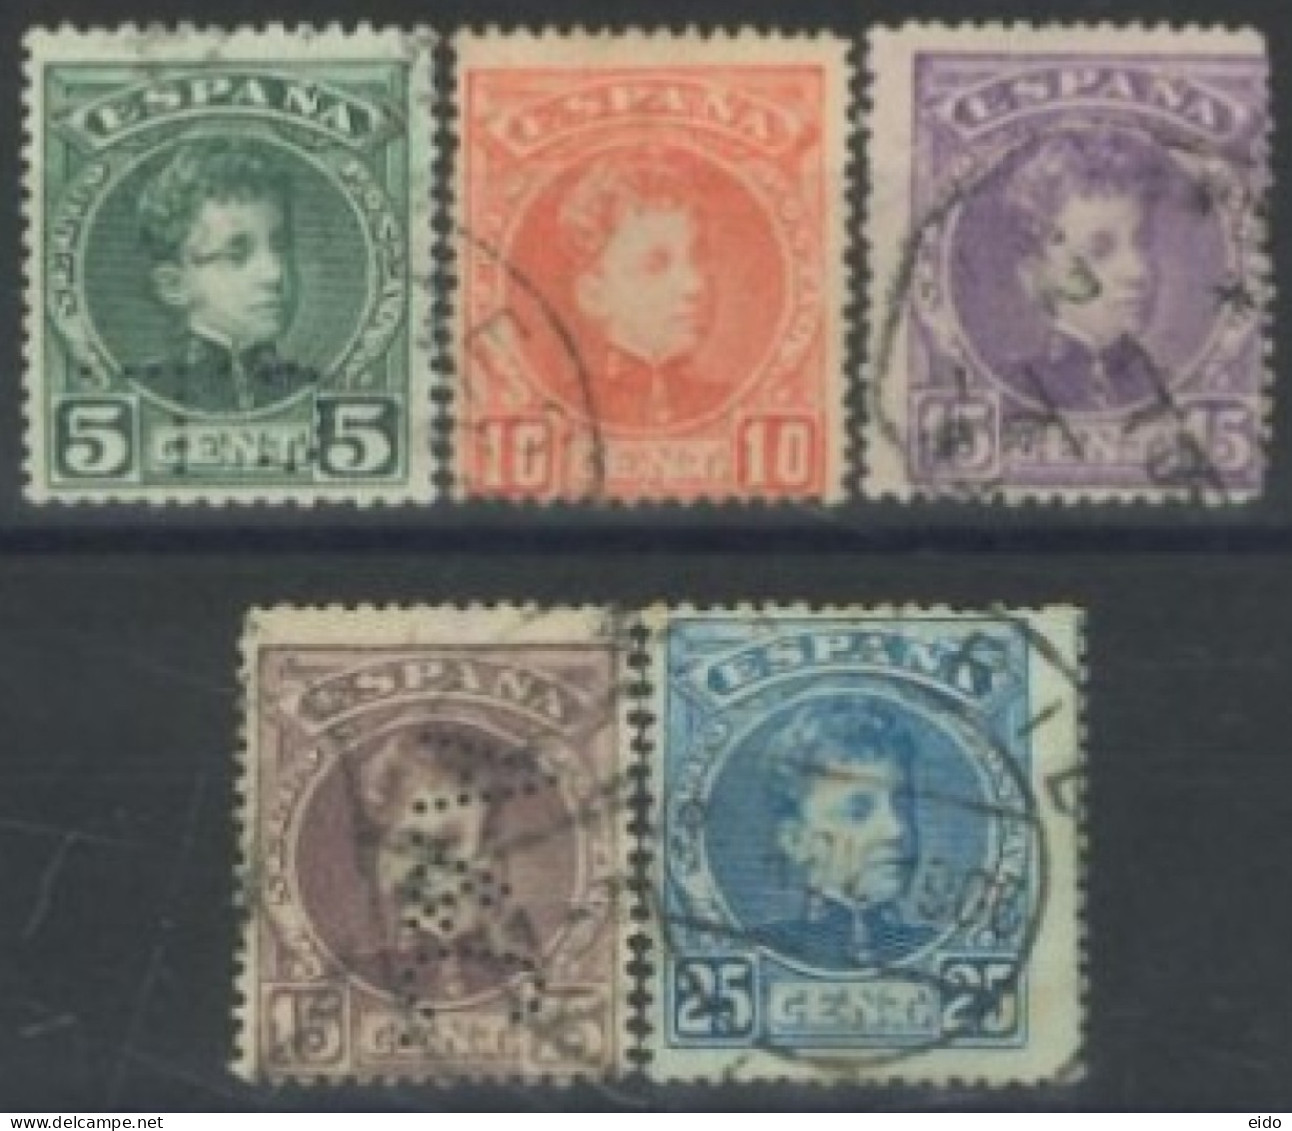 SPAIN, 1900/05, KING ALFONSO STAMPS SET OF 5, USED. - Gebraucht